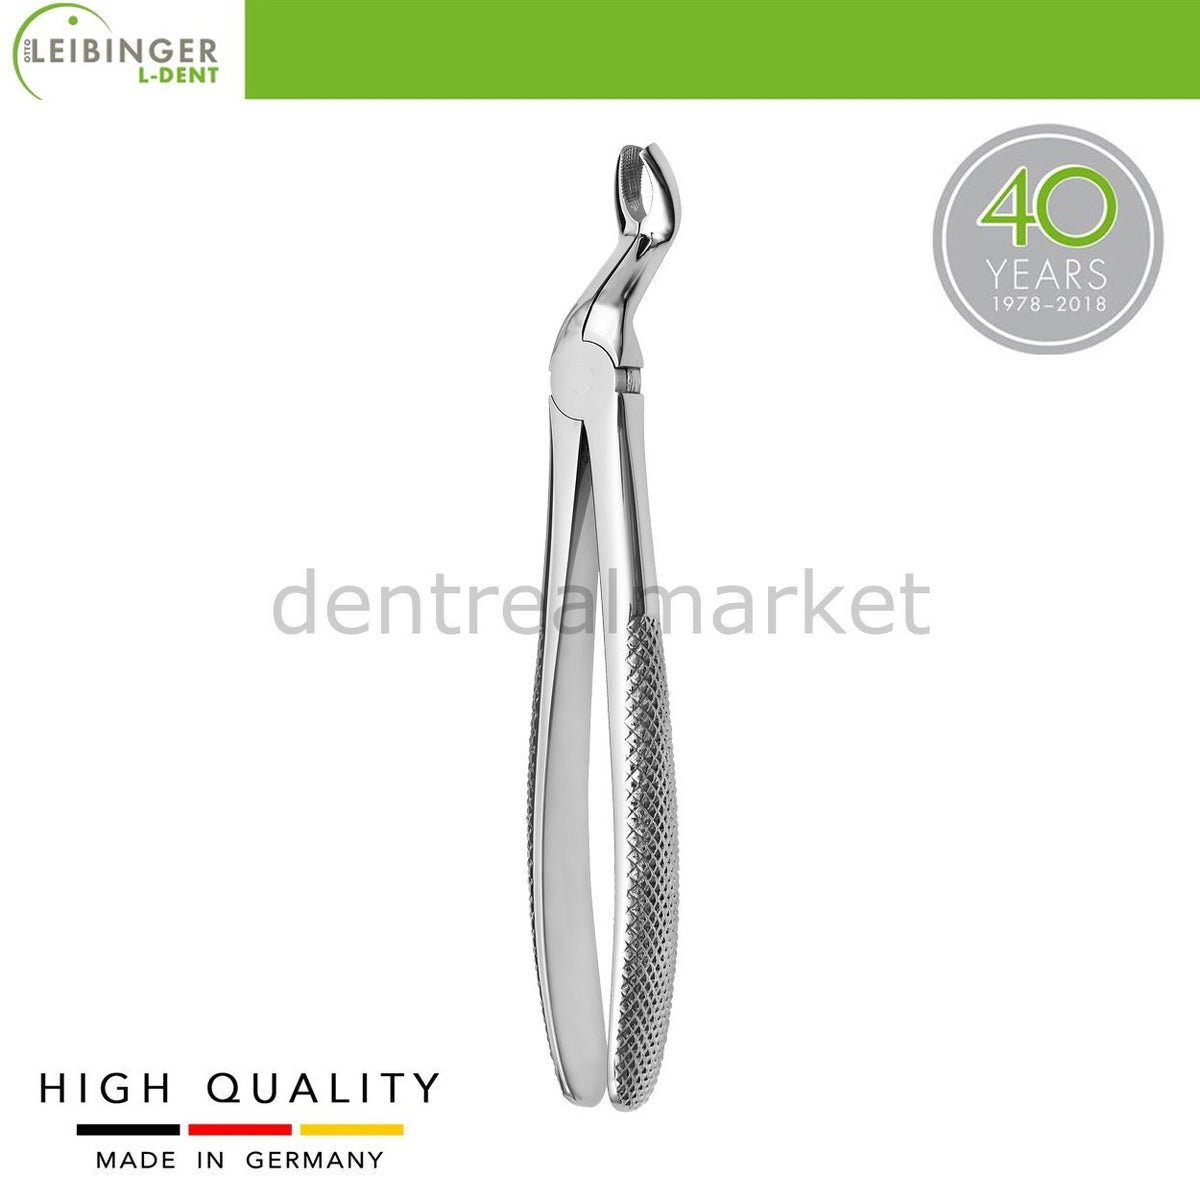 DentrealStore - Leibinger Adult Extracting Forceps 67A - Forceps for Upper Third Molars